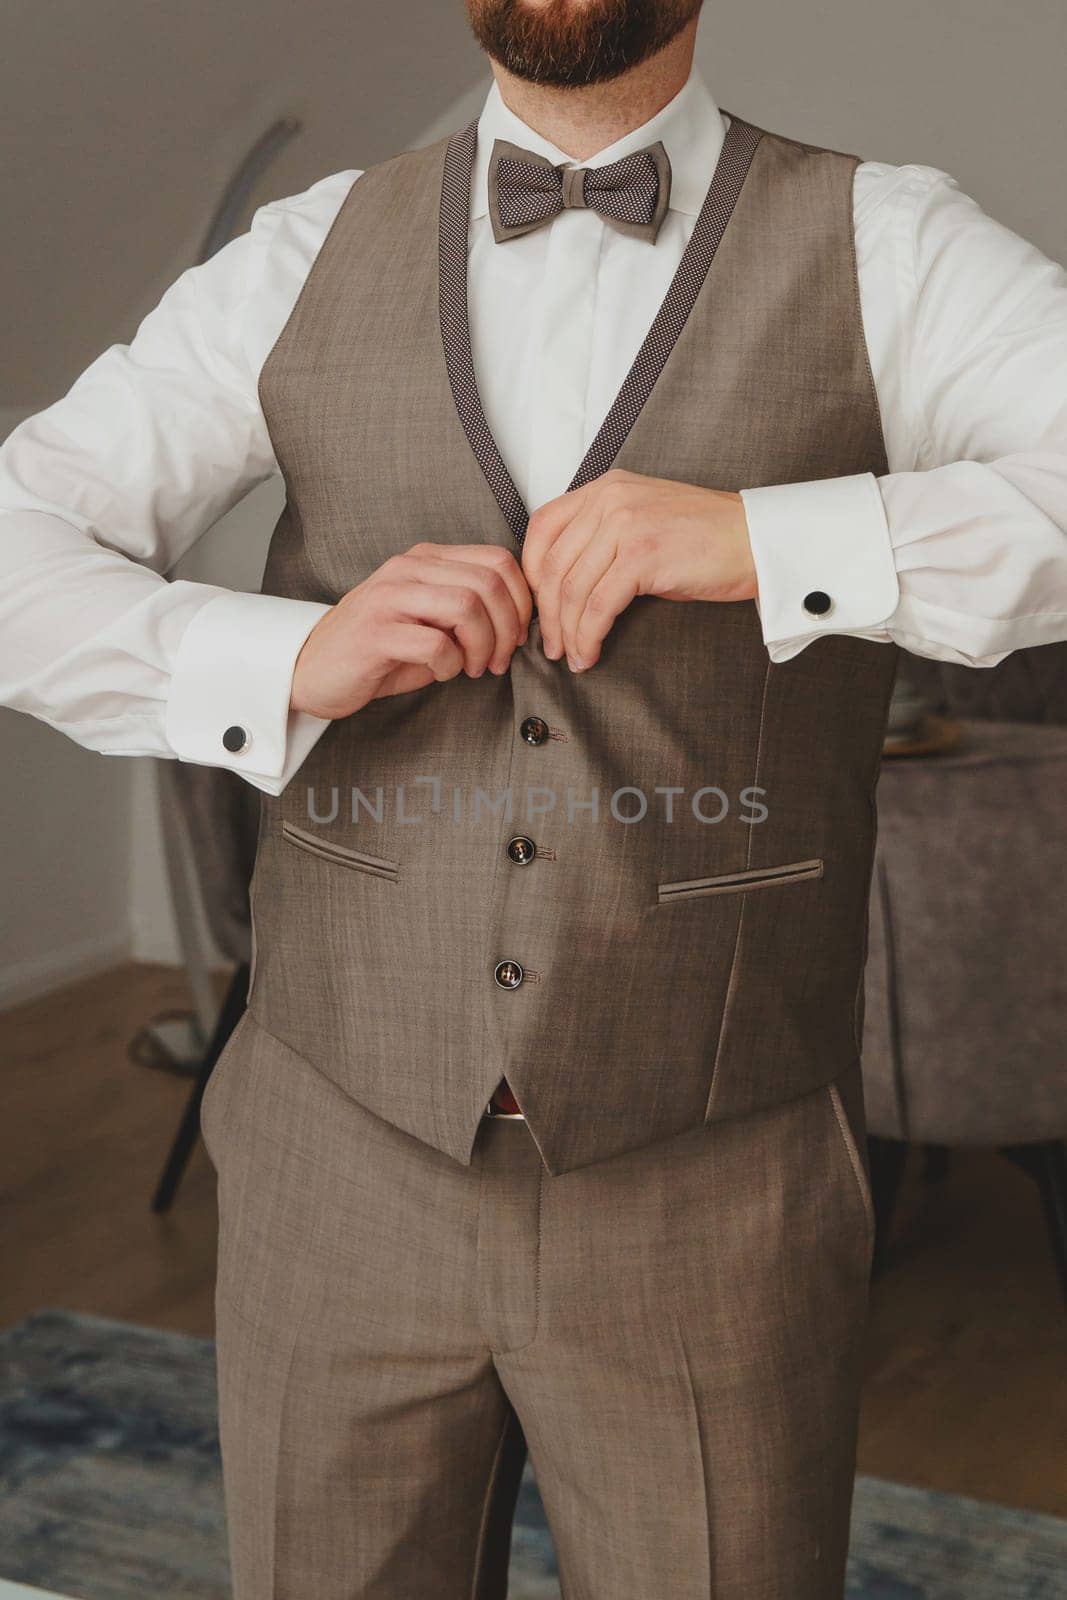 Groom buttons up the front of the waistcoat.